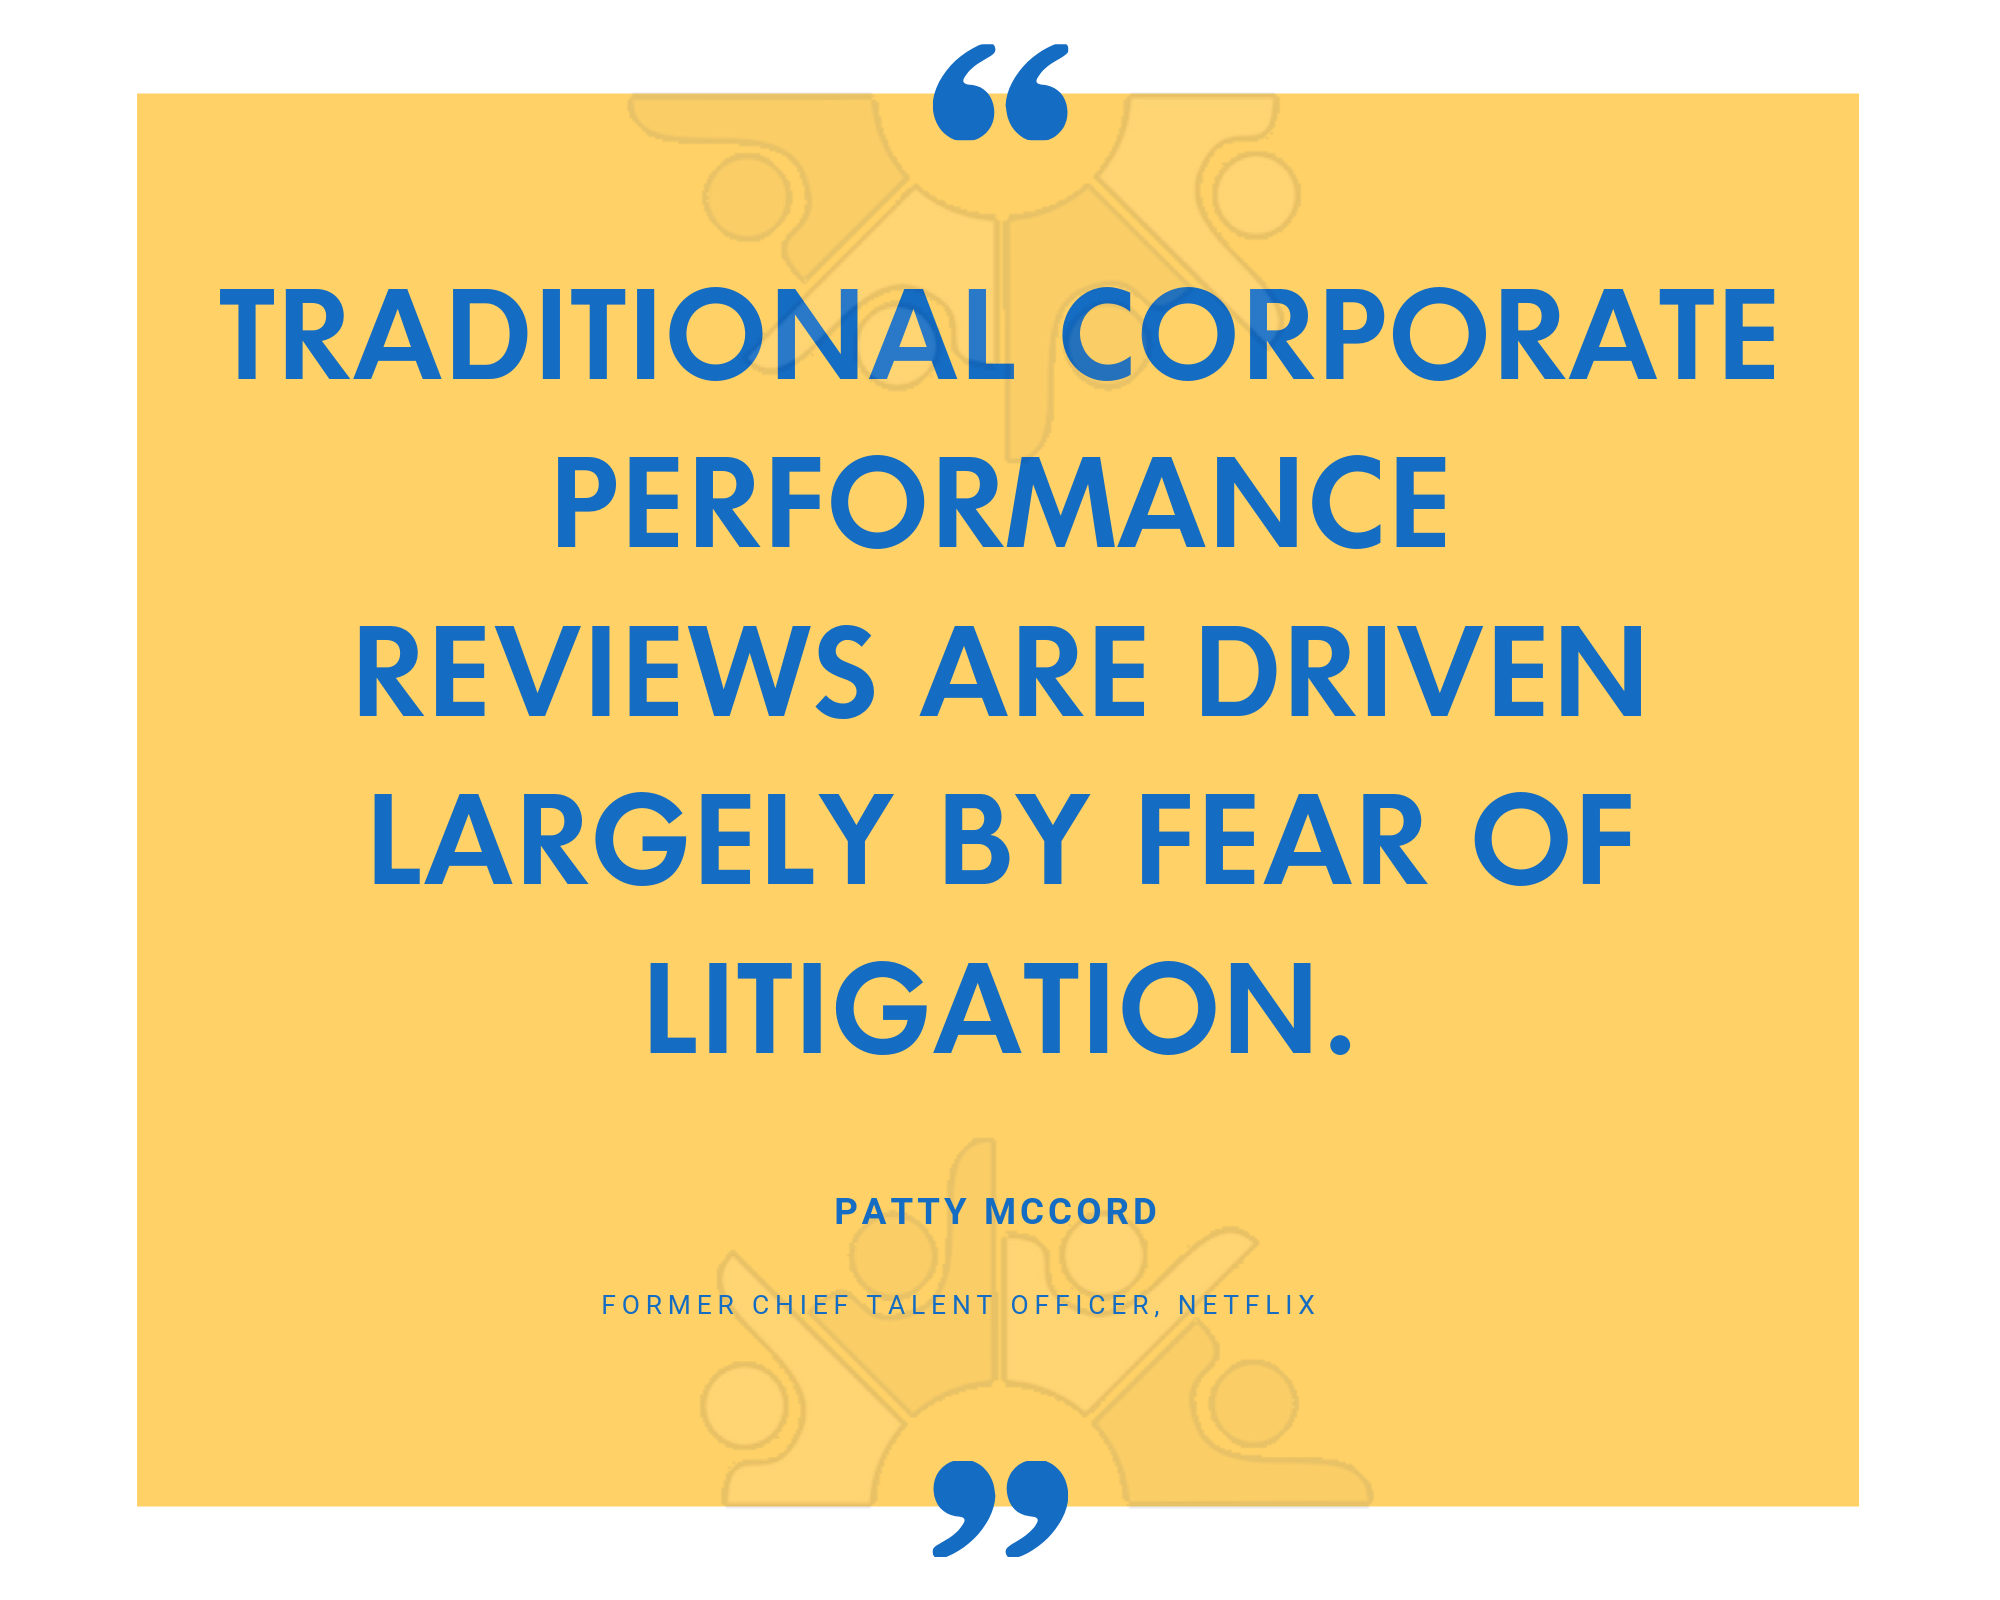 Traditional corporate performance reviews are driven largely by fear of litigation